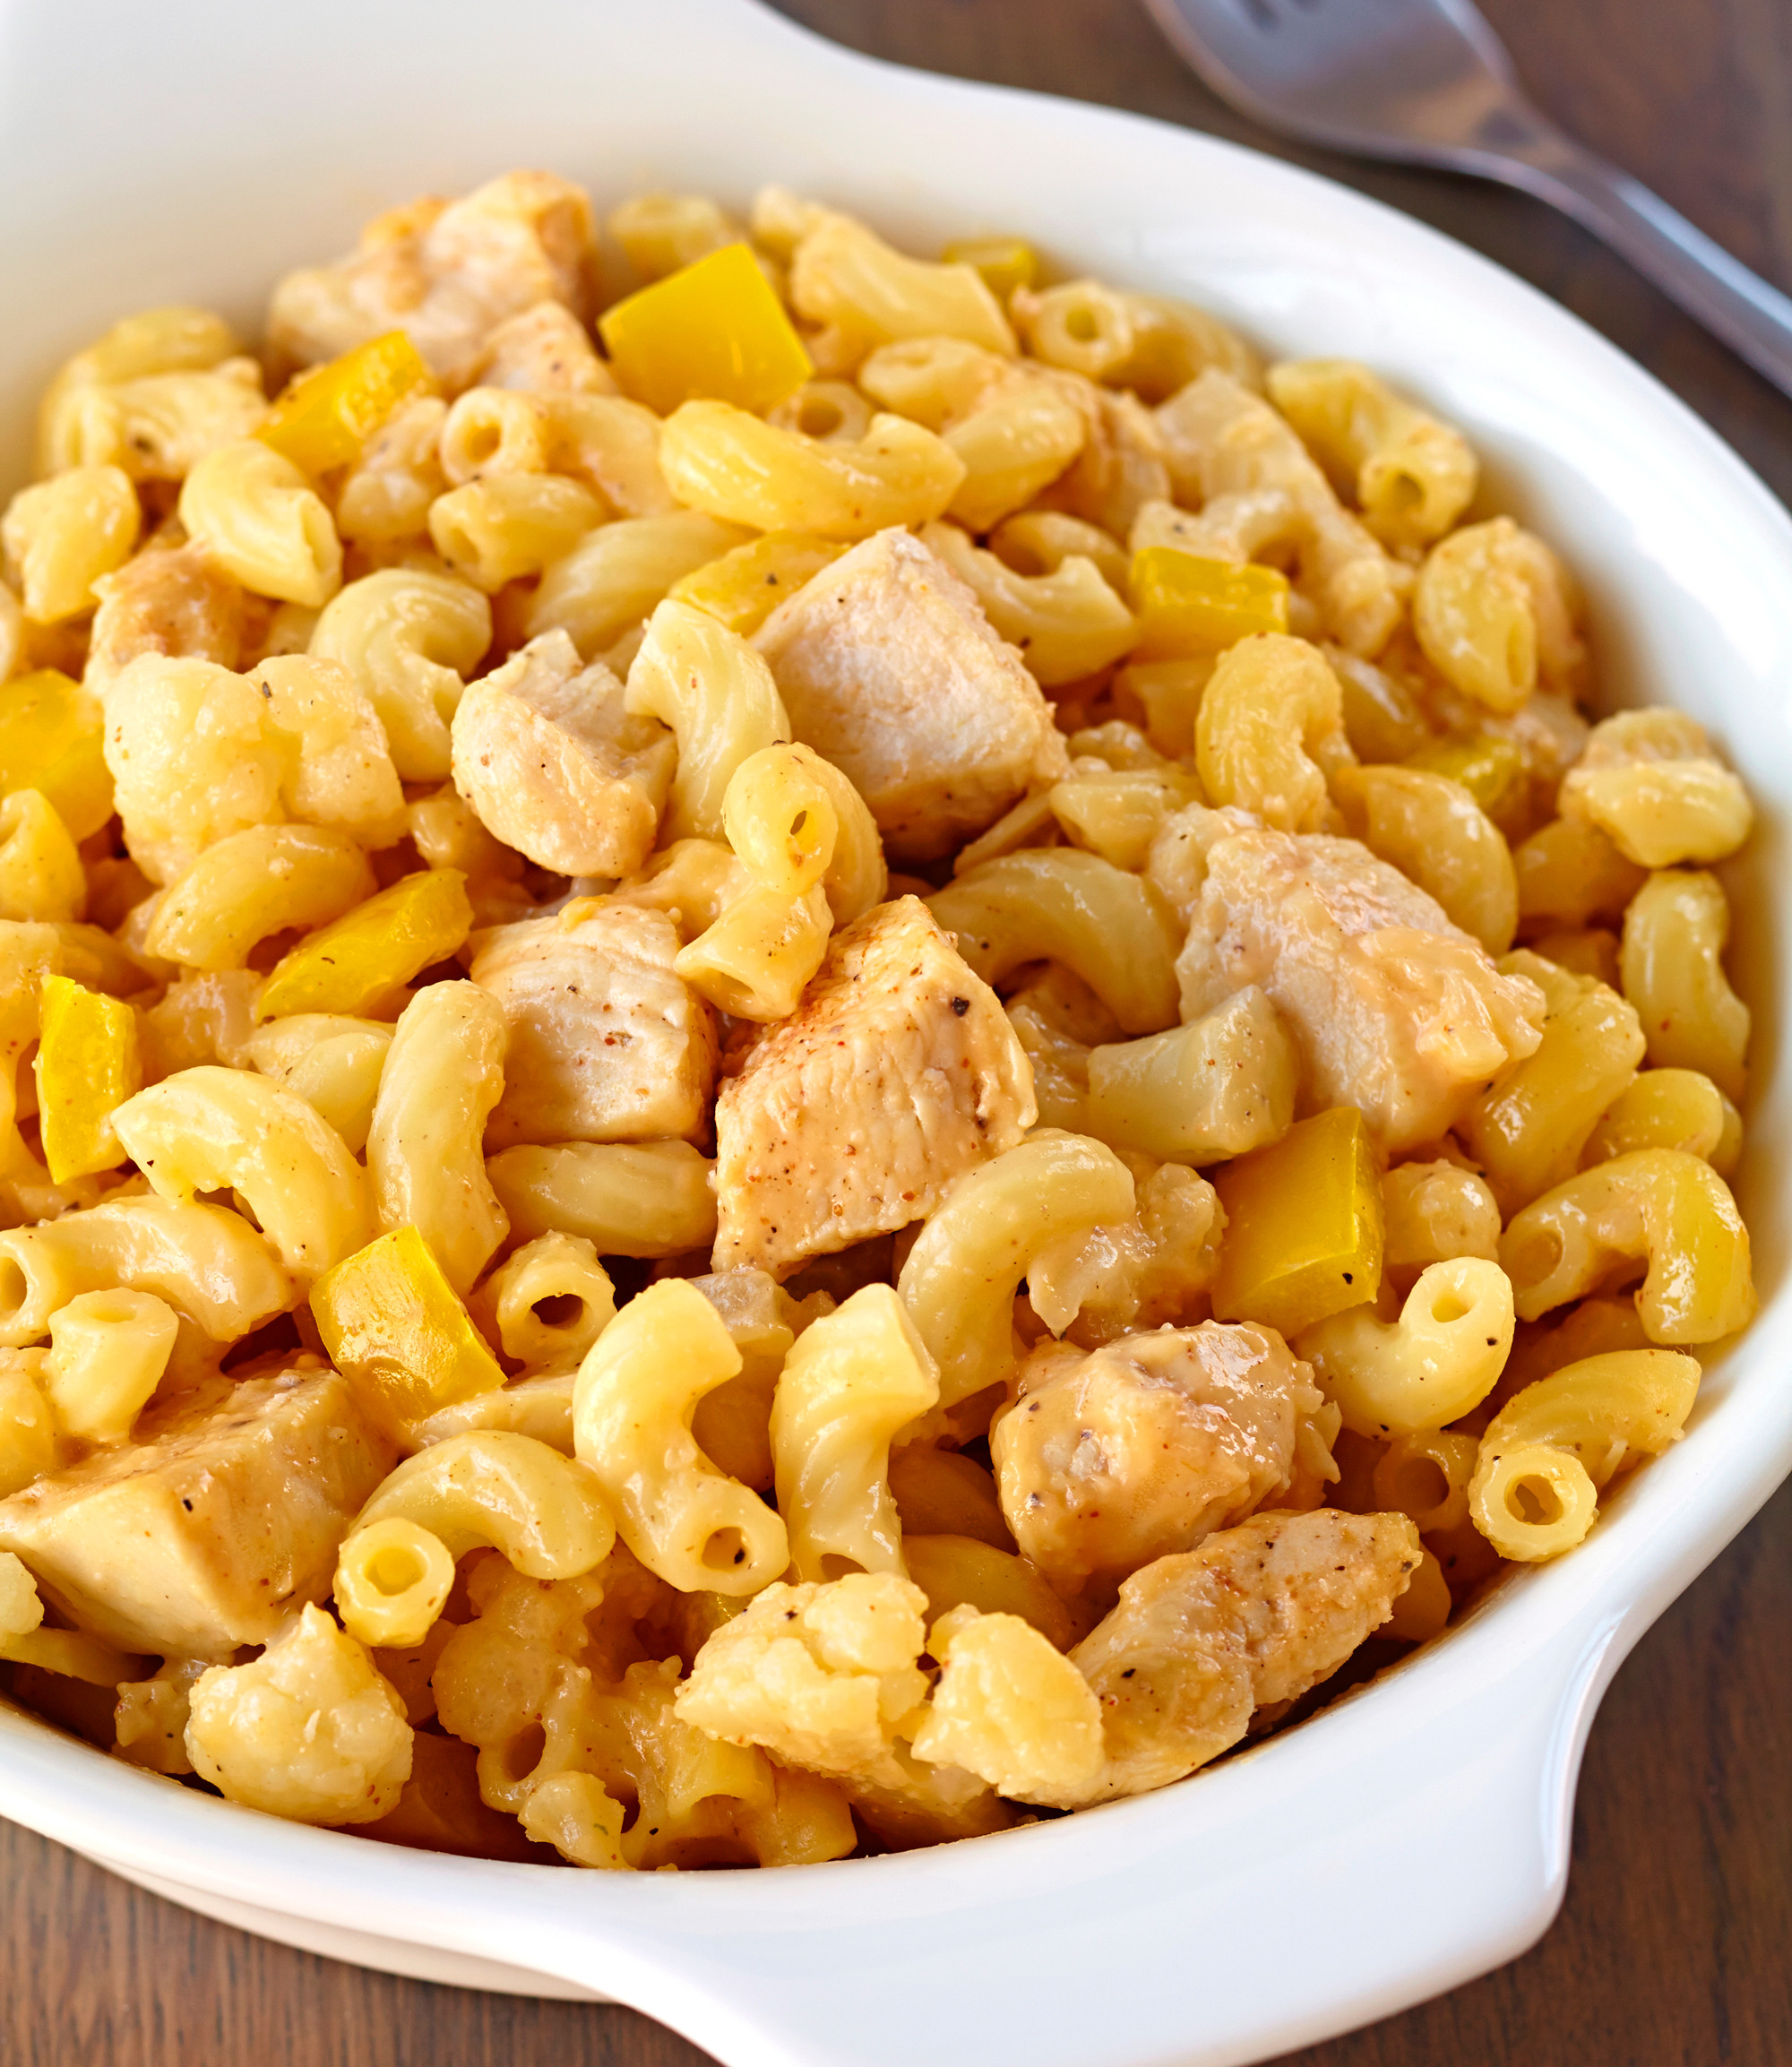 Low Calorie Macaroni And Cheese Recipes
 The Hungry Girl s Low Calorie Mac and Cheese With Chicken